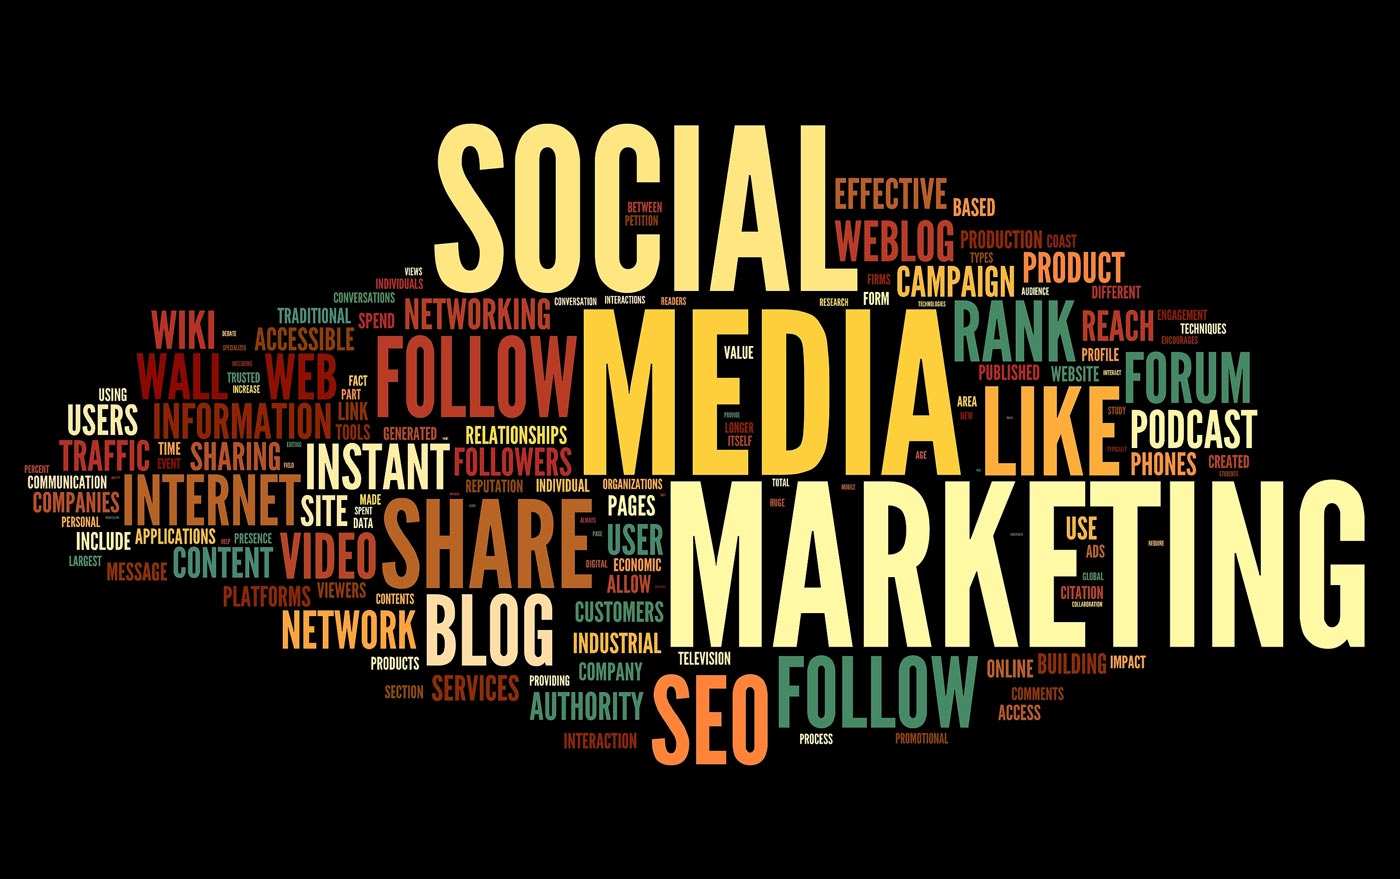 Word cloud of terms associated with Social Media Marketing, such as blog, share, SEO, follow, networking, etc.